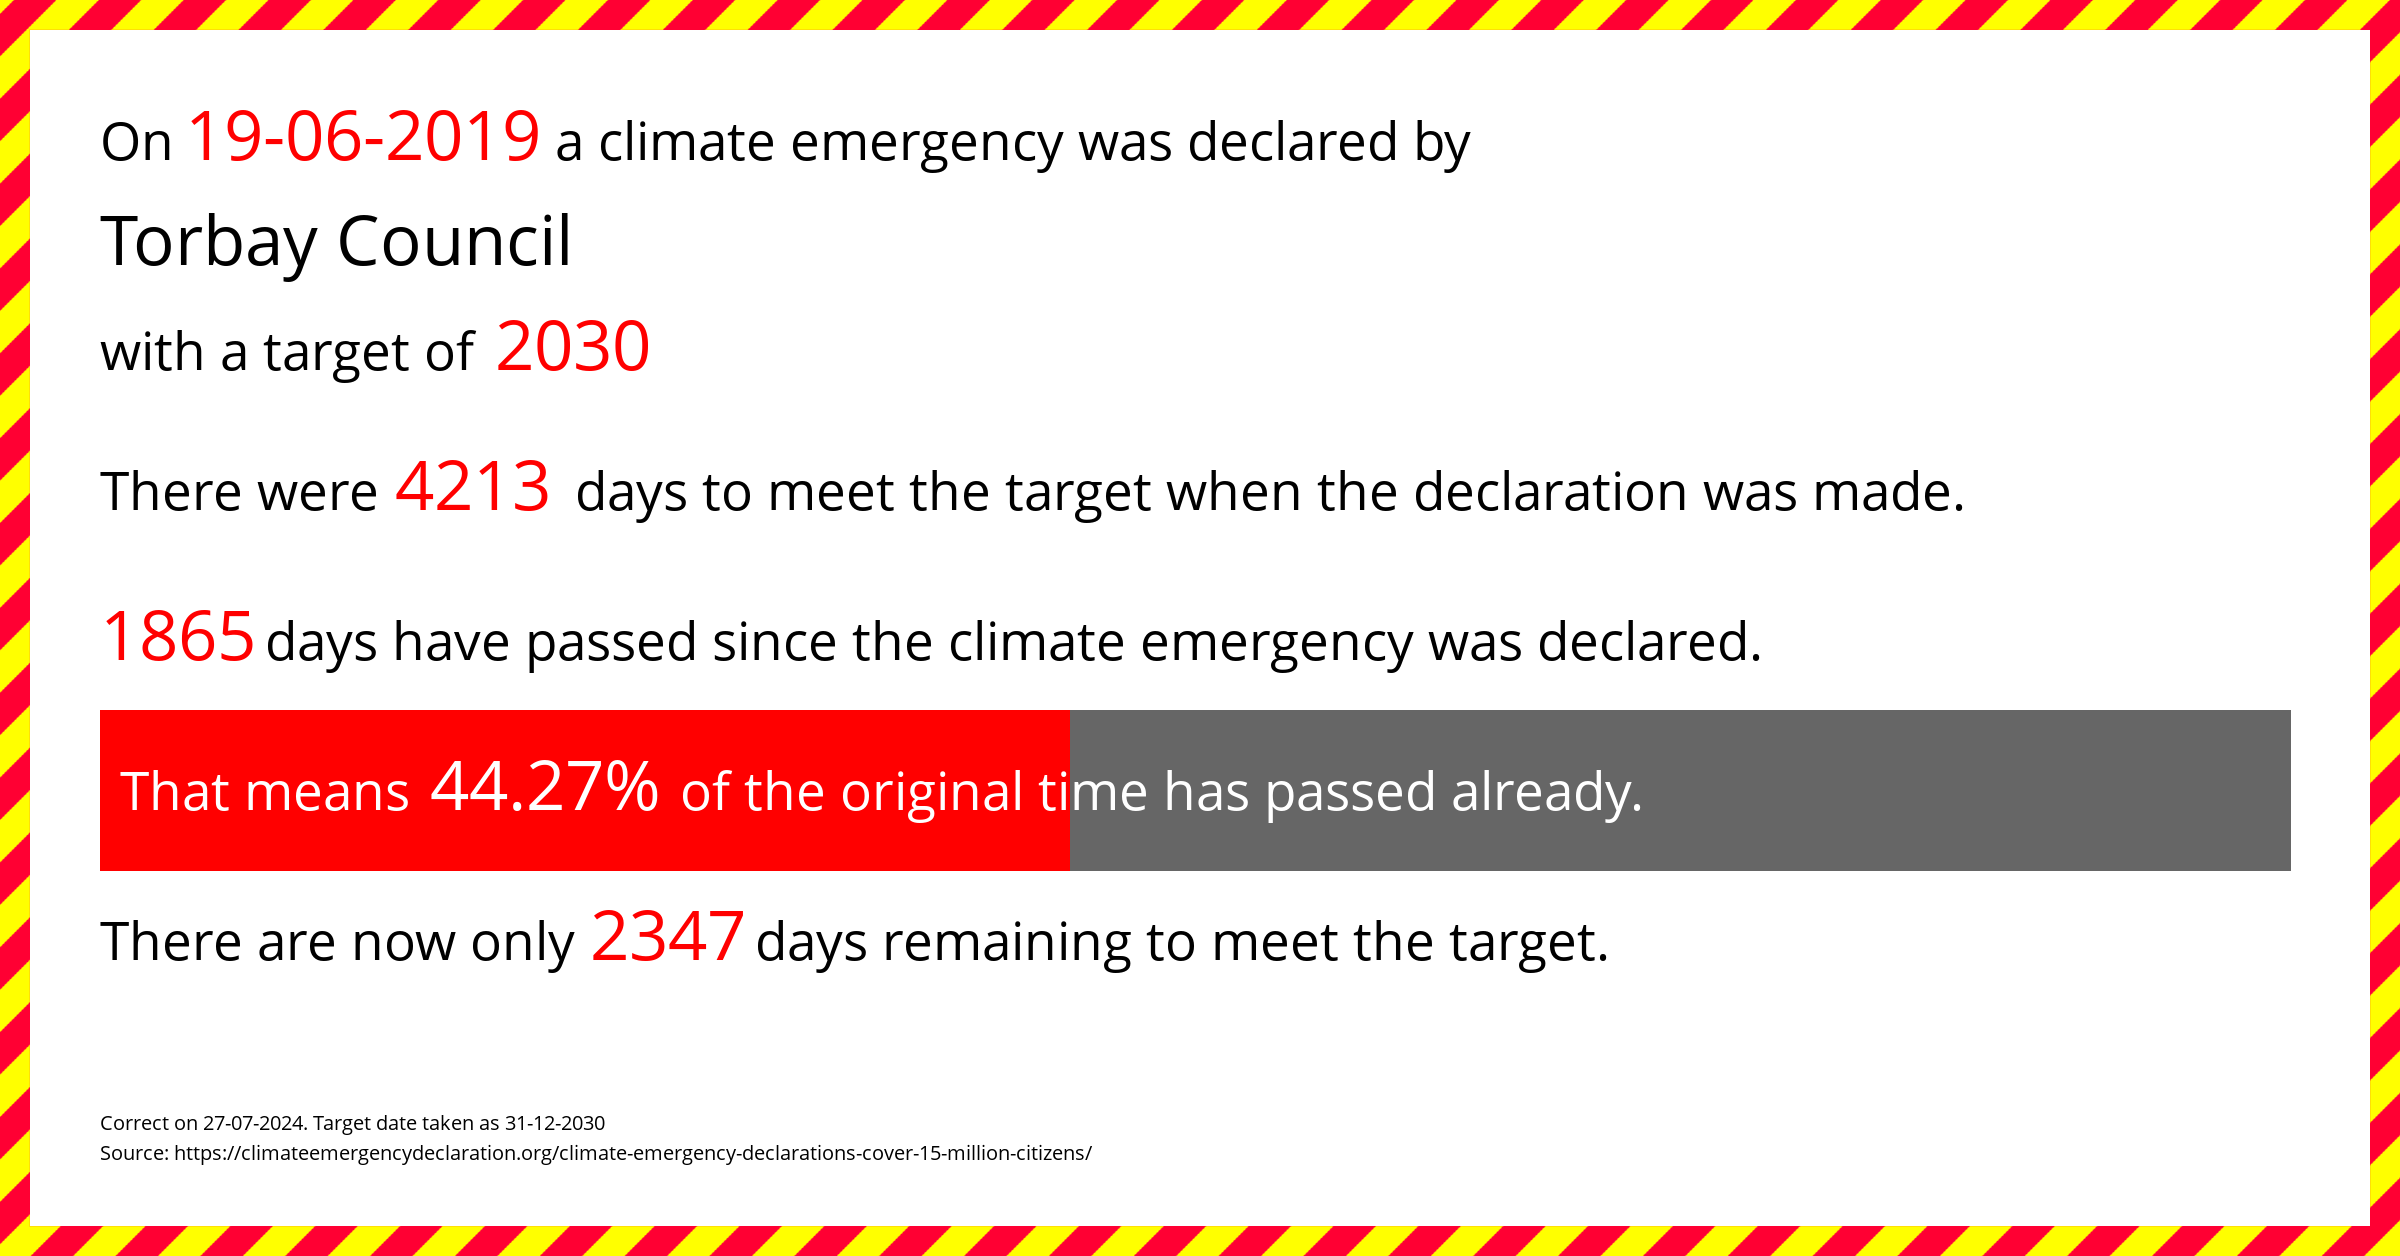 Torbay Council declared a Climate emergency on Wednesday 19th June 2019, with a target of 2030.